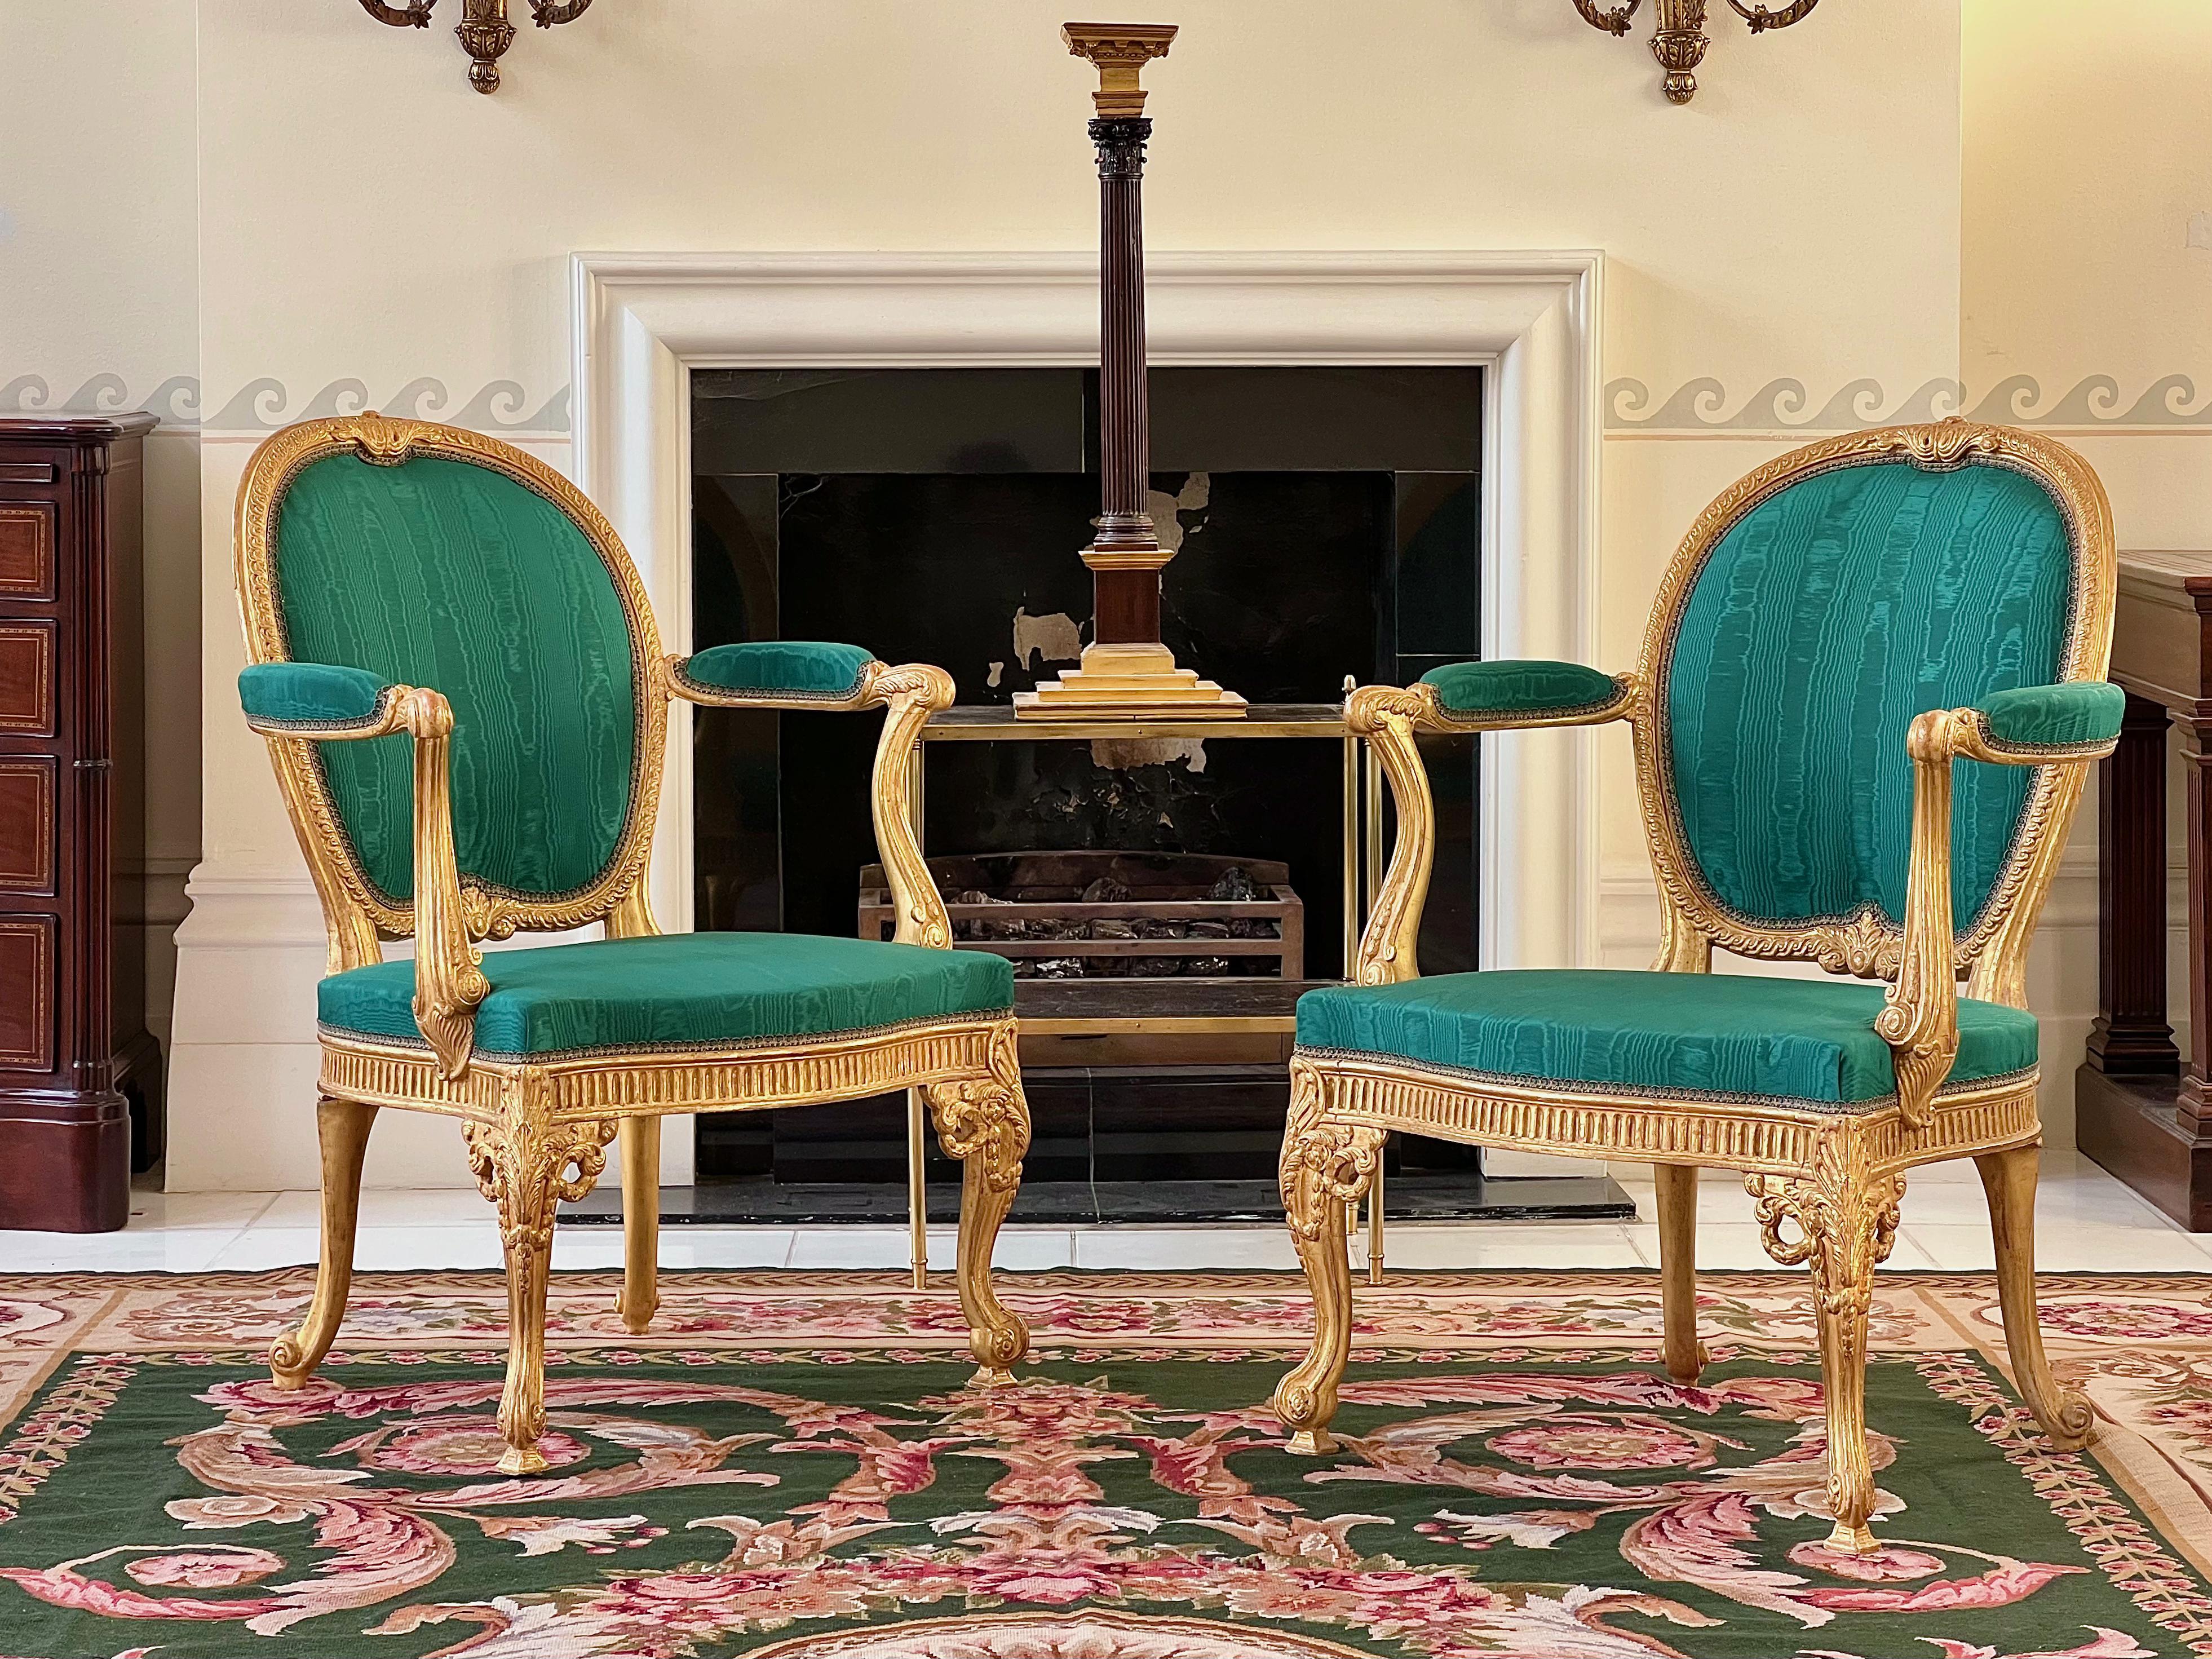 ***PLEASE NOTE THAT THE LIST PRICE IS FOR THE PAIR***

An exceptional pair of George III style giltwood armchairs, 19th century copies of one of Thomas Chippendale's most beautiful models.
English, c. 1890.

Design
The present armchairs belong to a